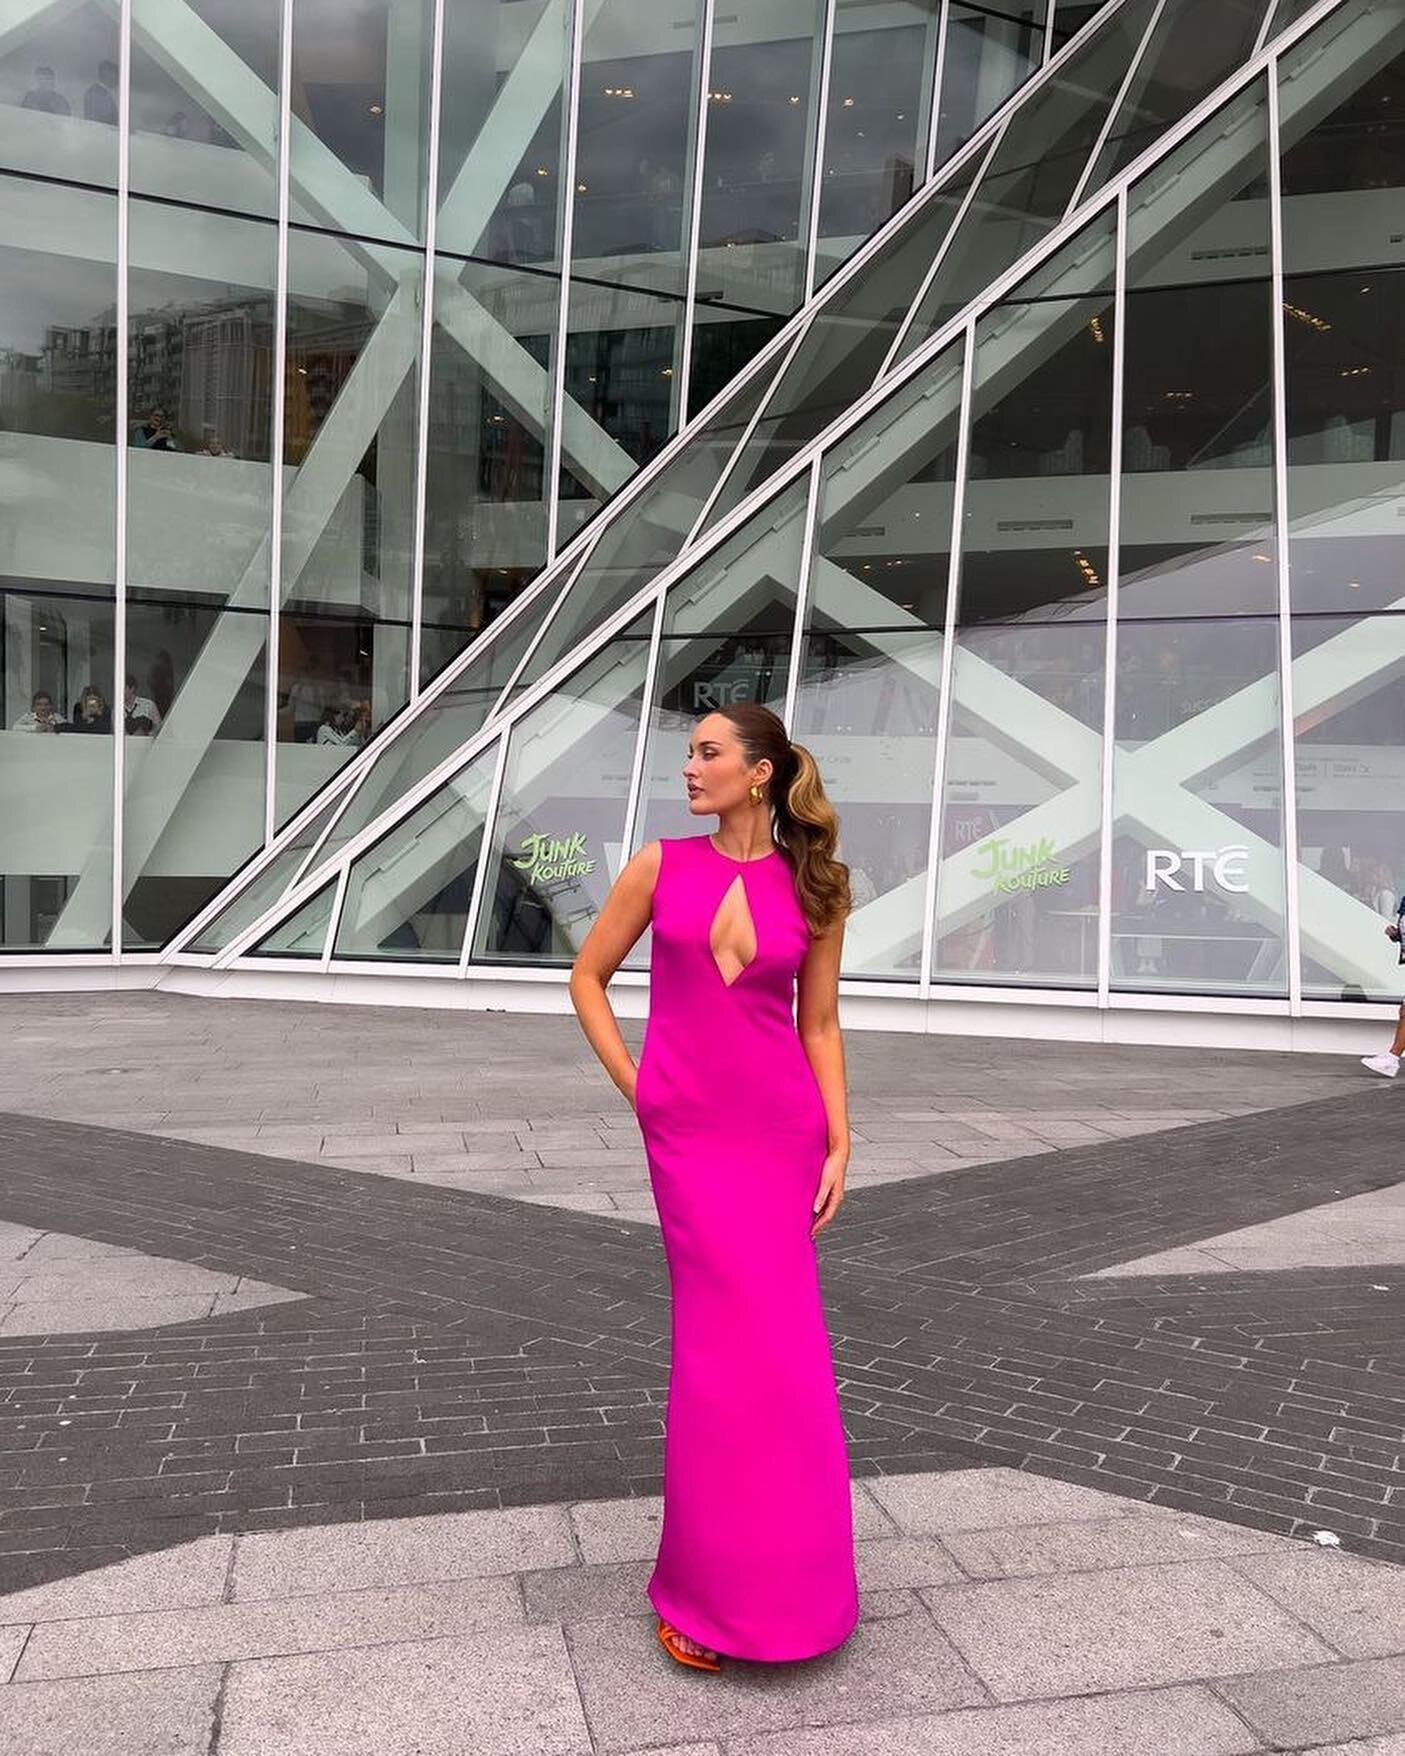 @rozannapurcell at the @junkkouture Dublin City Final, wearing #TheCara. The triple crepe, fluorescent pink dress will drop this summer along with the launch of #Season2

#smllondon